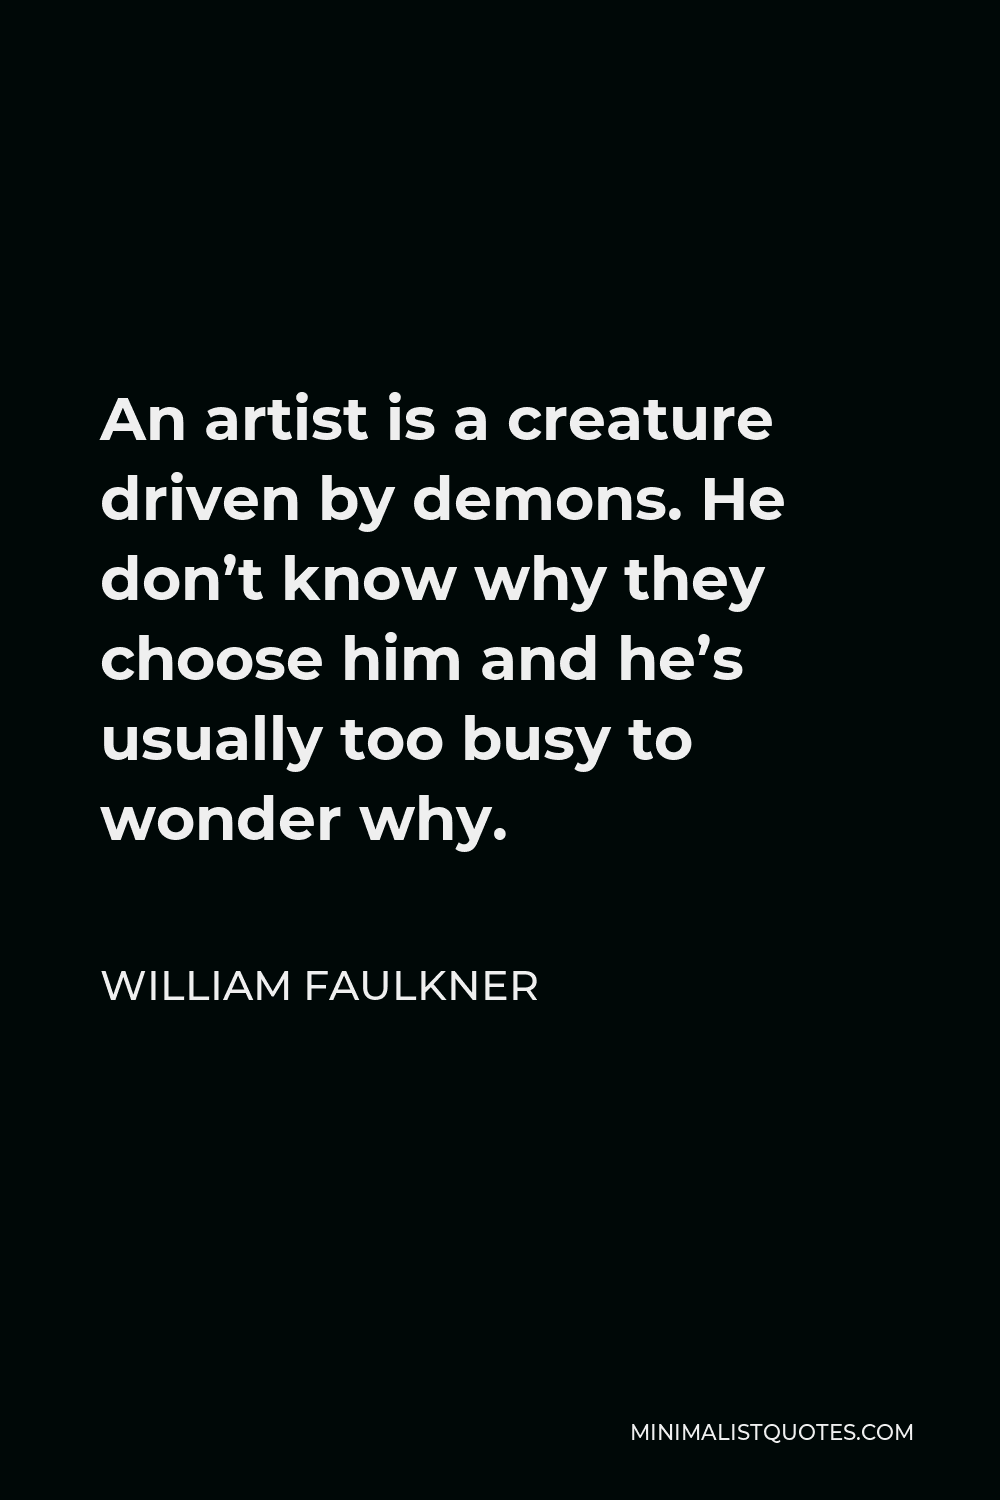 William Faulkner Quote - An artist is a creature driven by demons. He don’t know why they choose him and he’s usually too busy to wonder why.